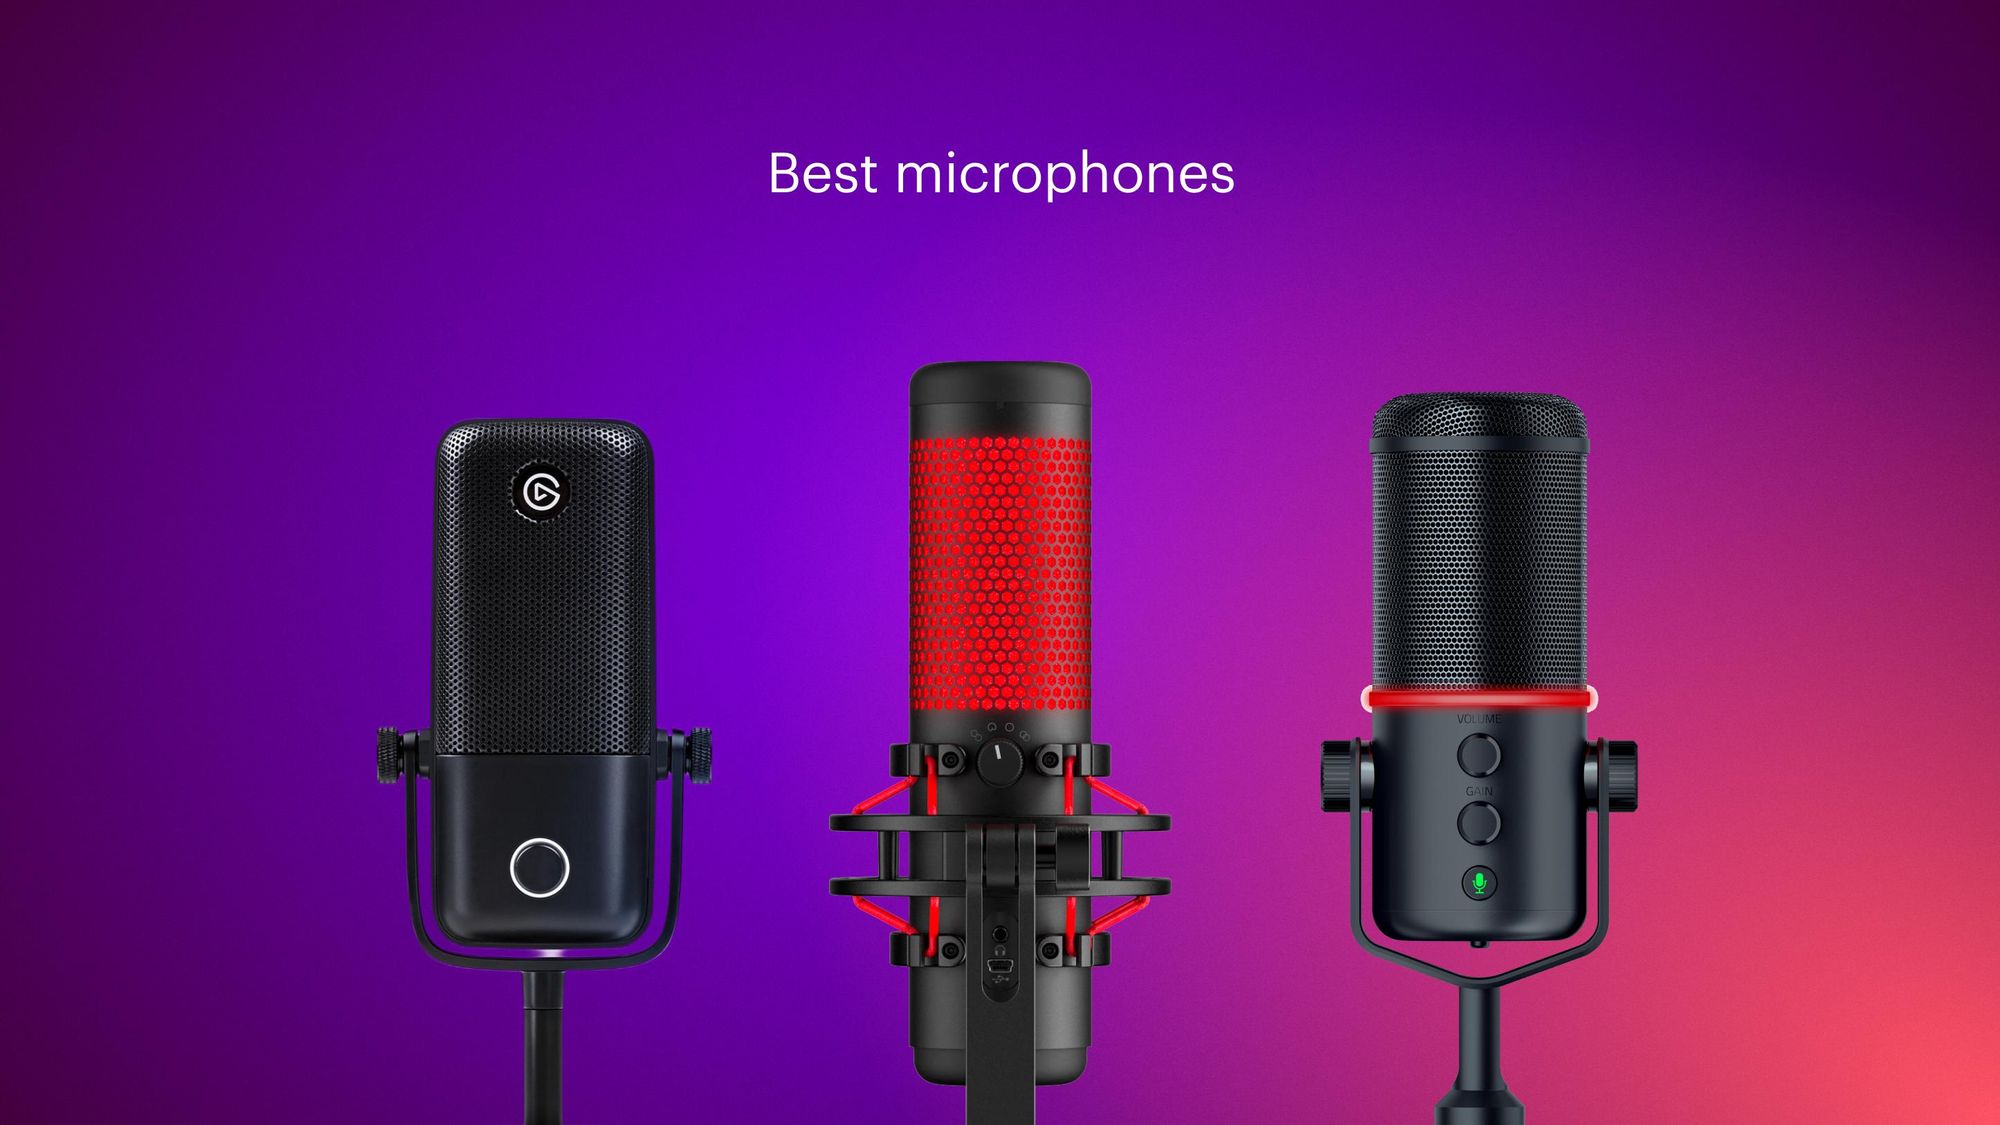 Top 10 microphones for live streaming